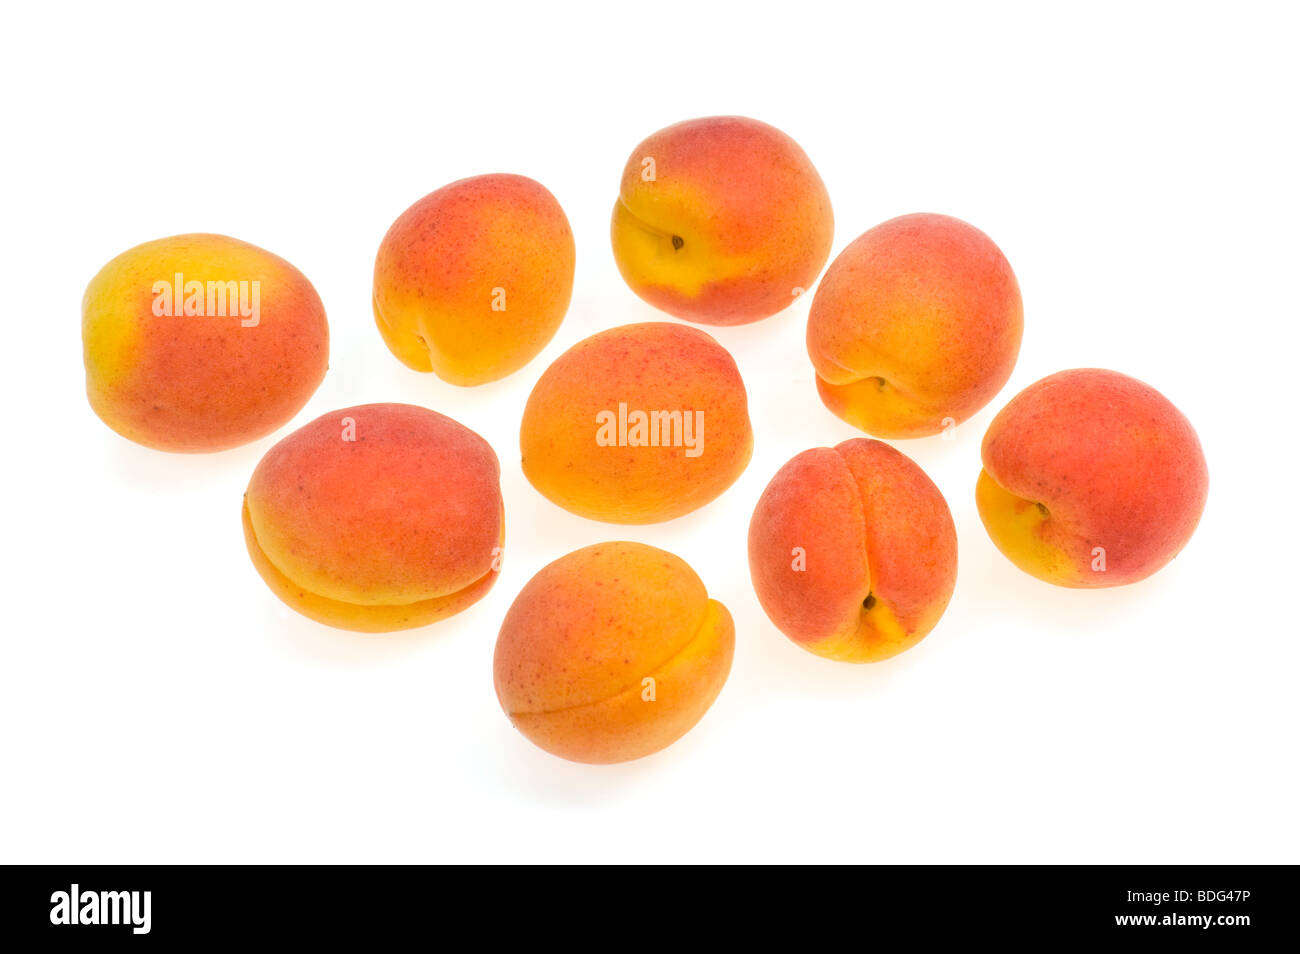 fresh french APRICOT cutout white background studio shot FOOD fruit sweet fresh orange red yellow just pur many multi much some Stock Photo